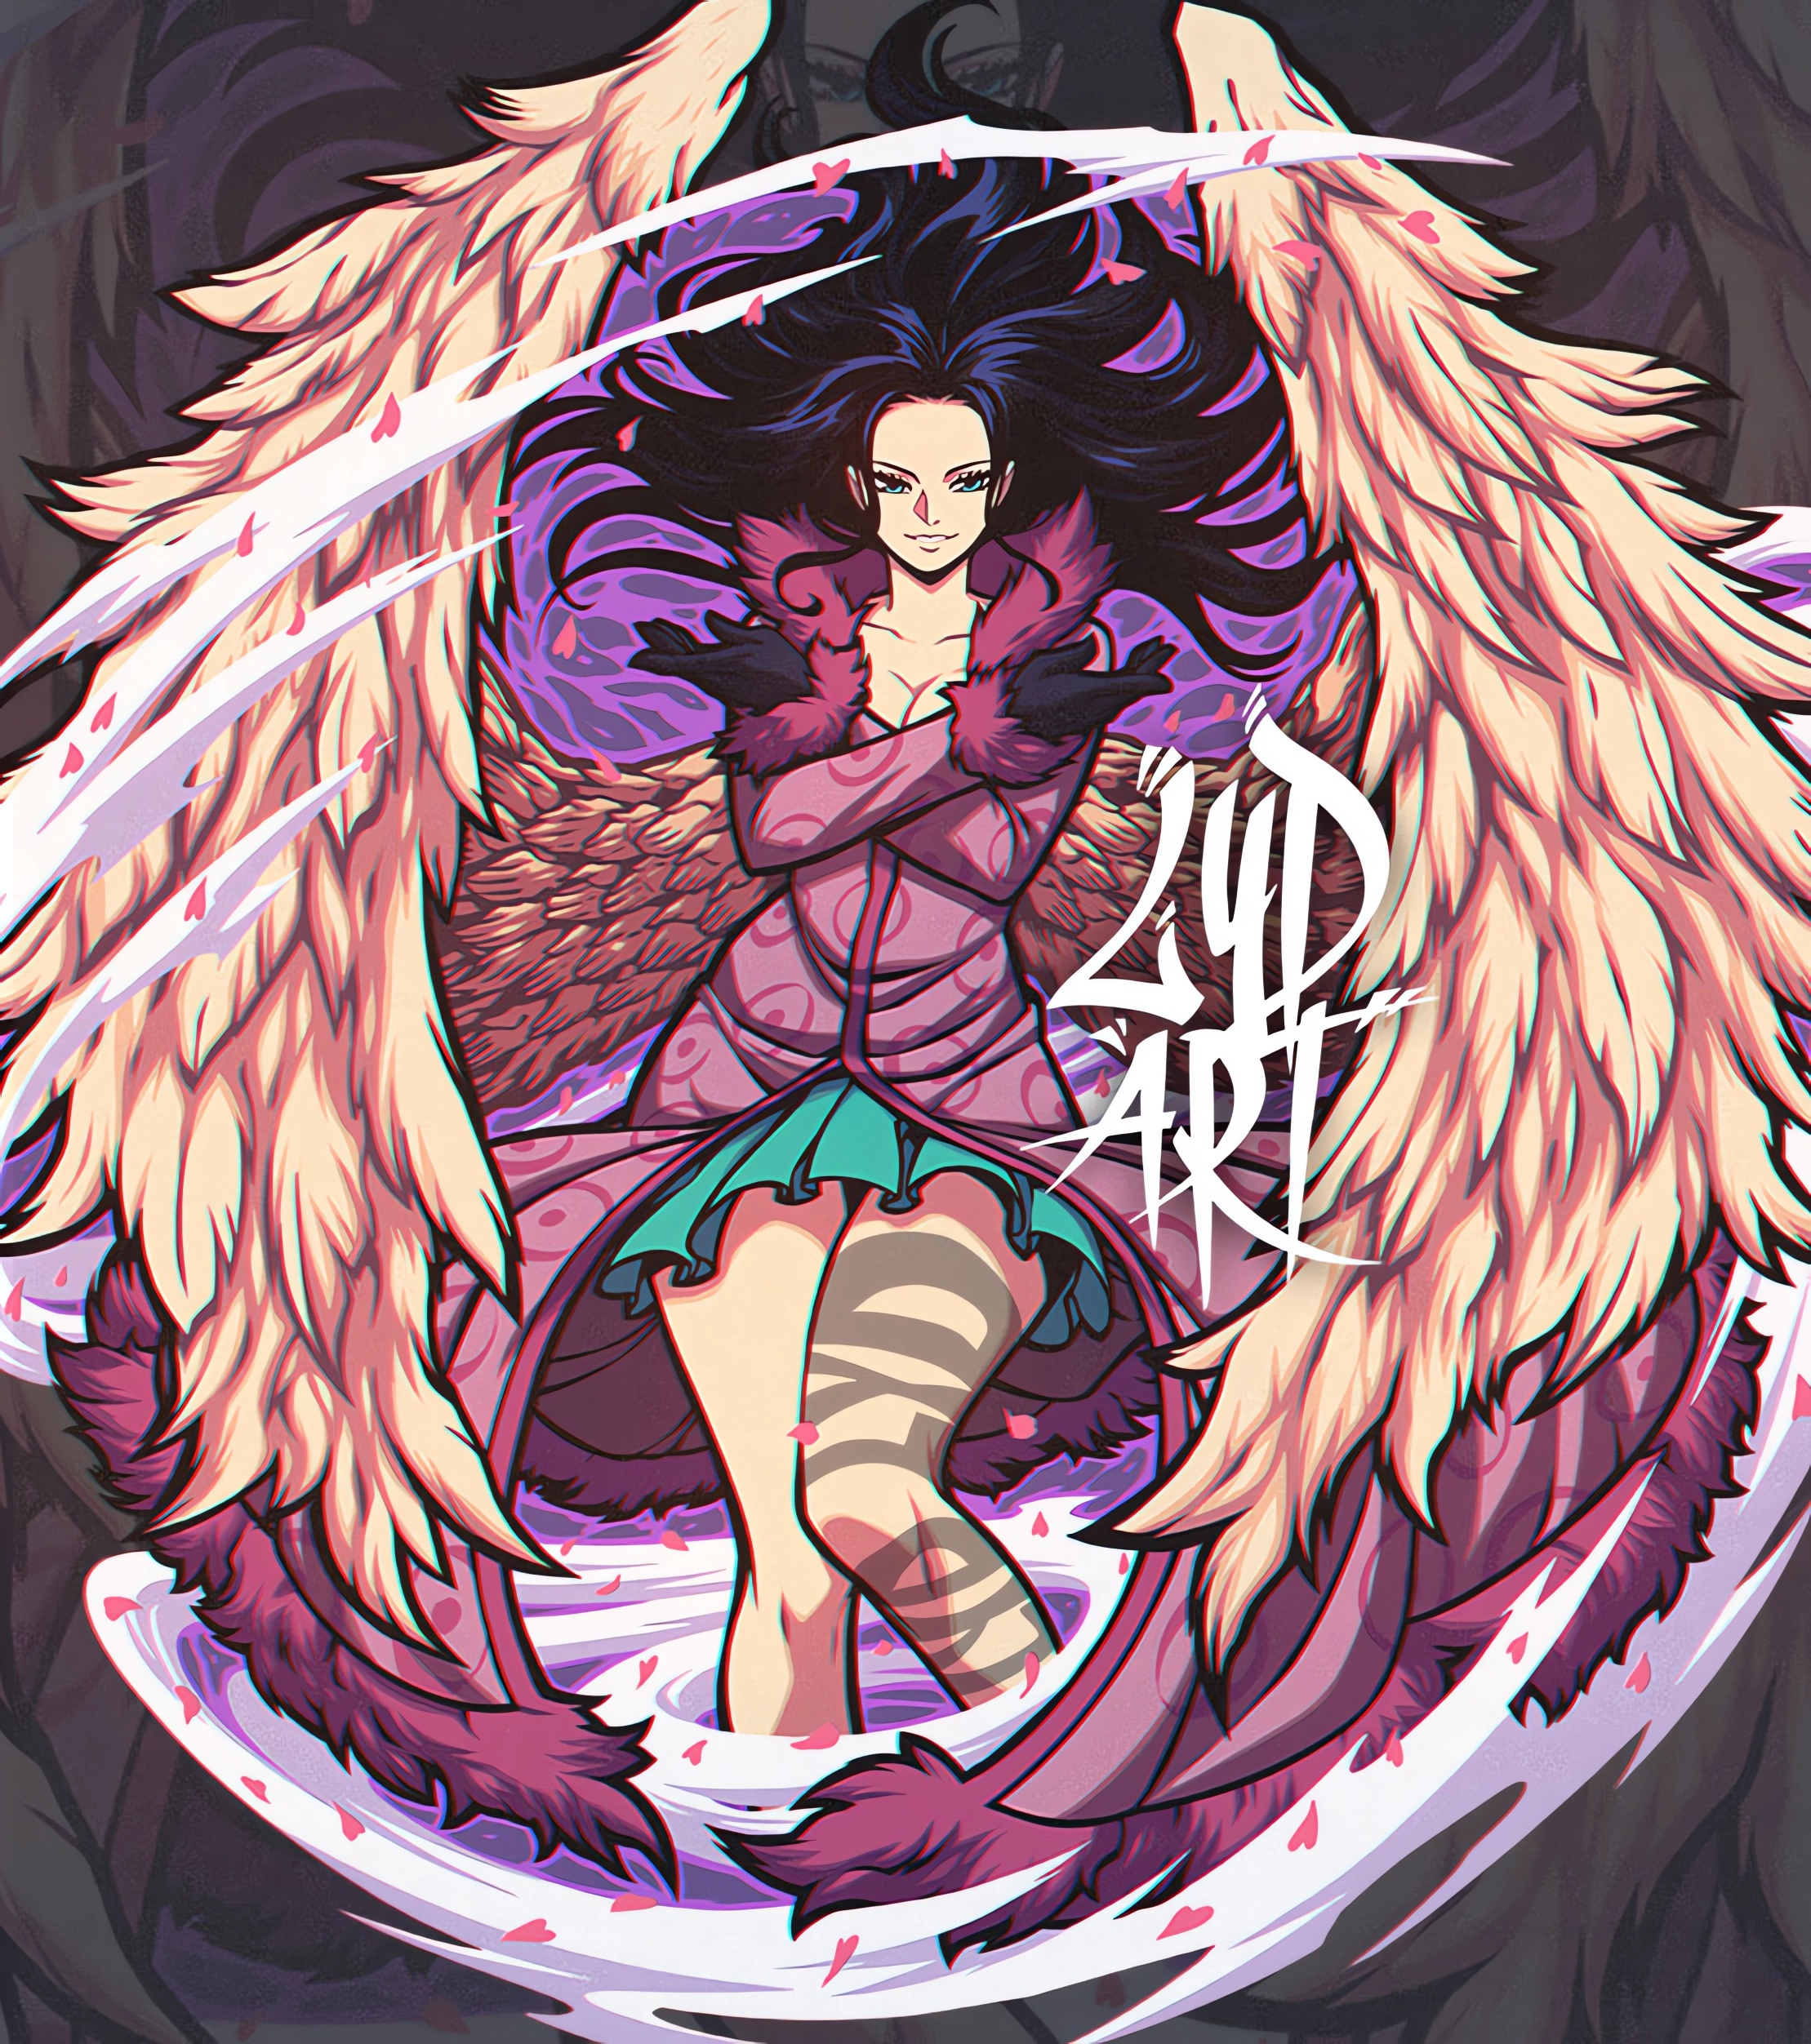 Anime 2218x2504 Nico Robin One Piece LYDart_Mclo anime girl with wings anime girls portrait display looking at viewer long hair smiling heart (design)